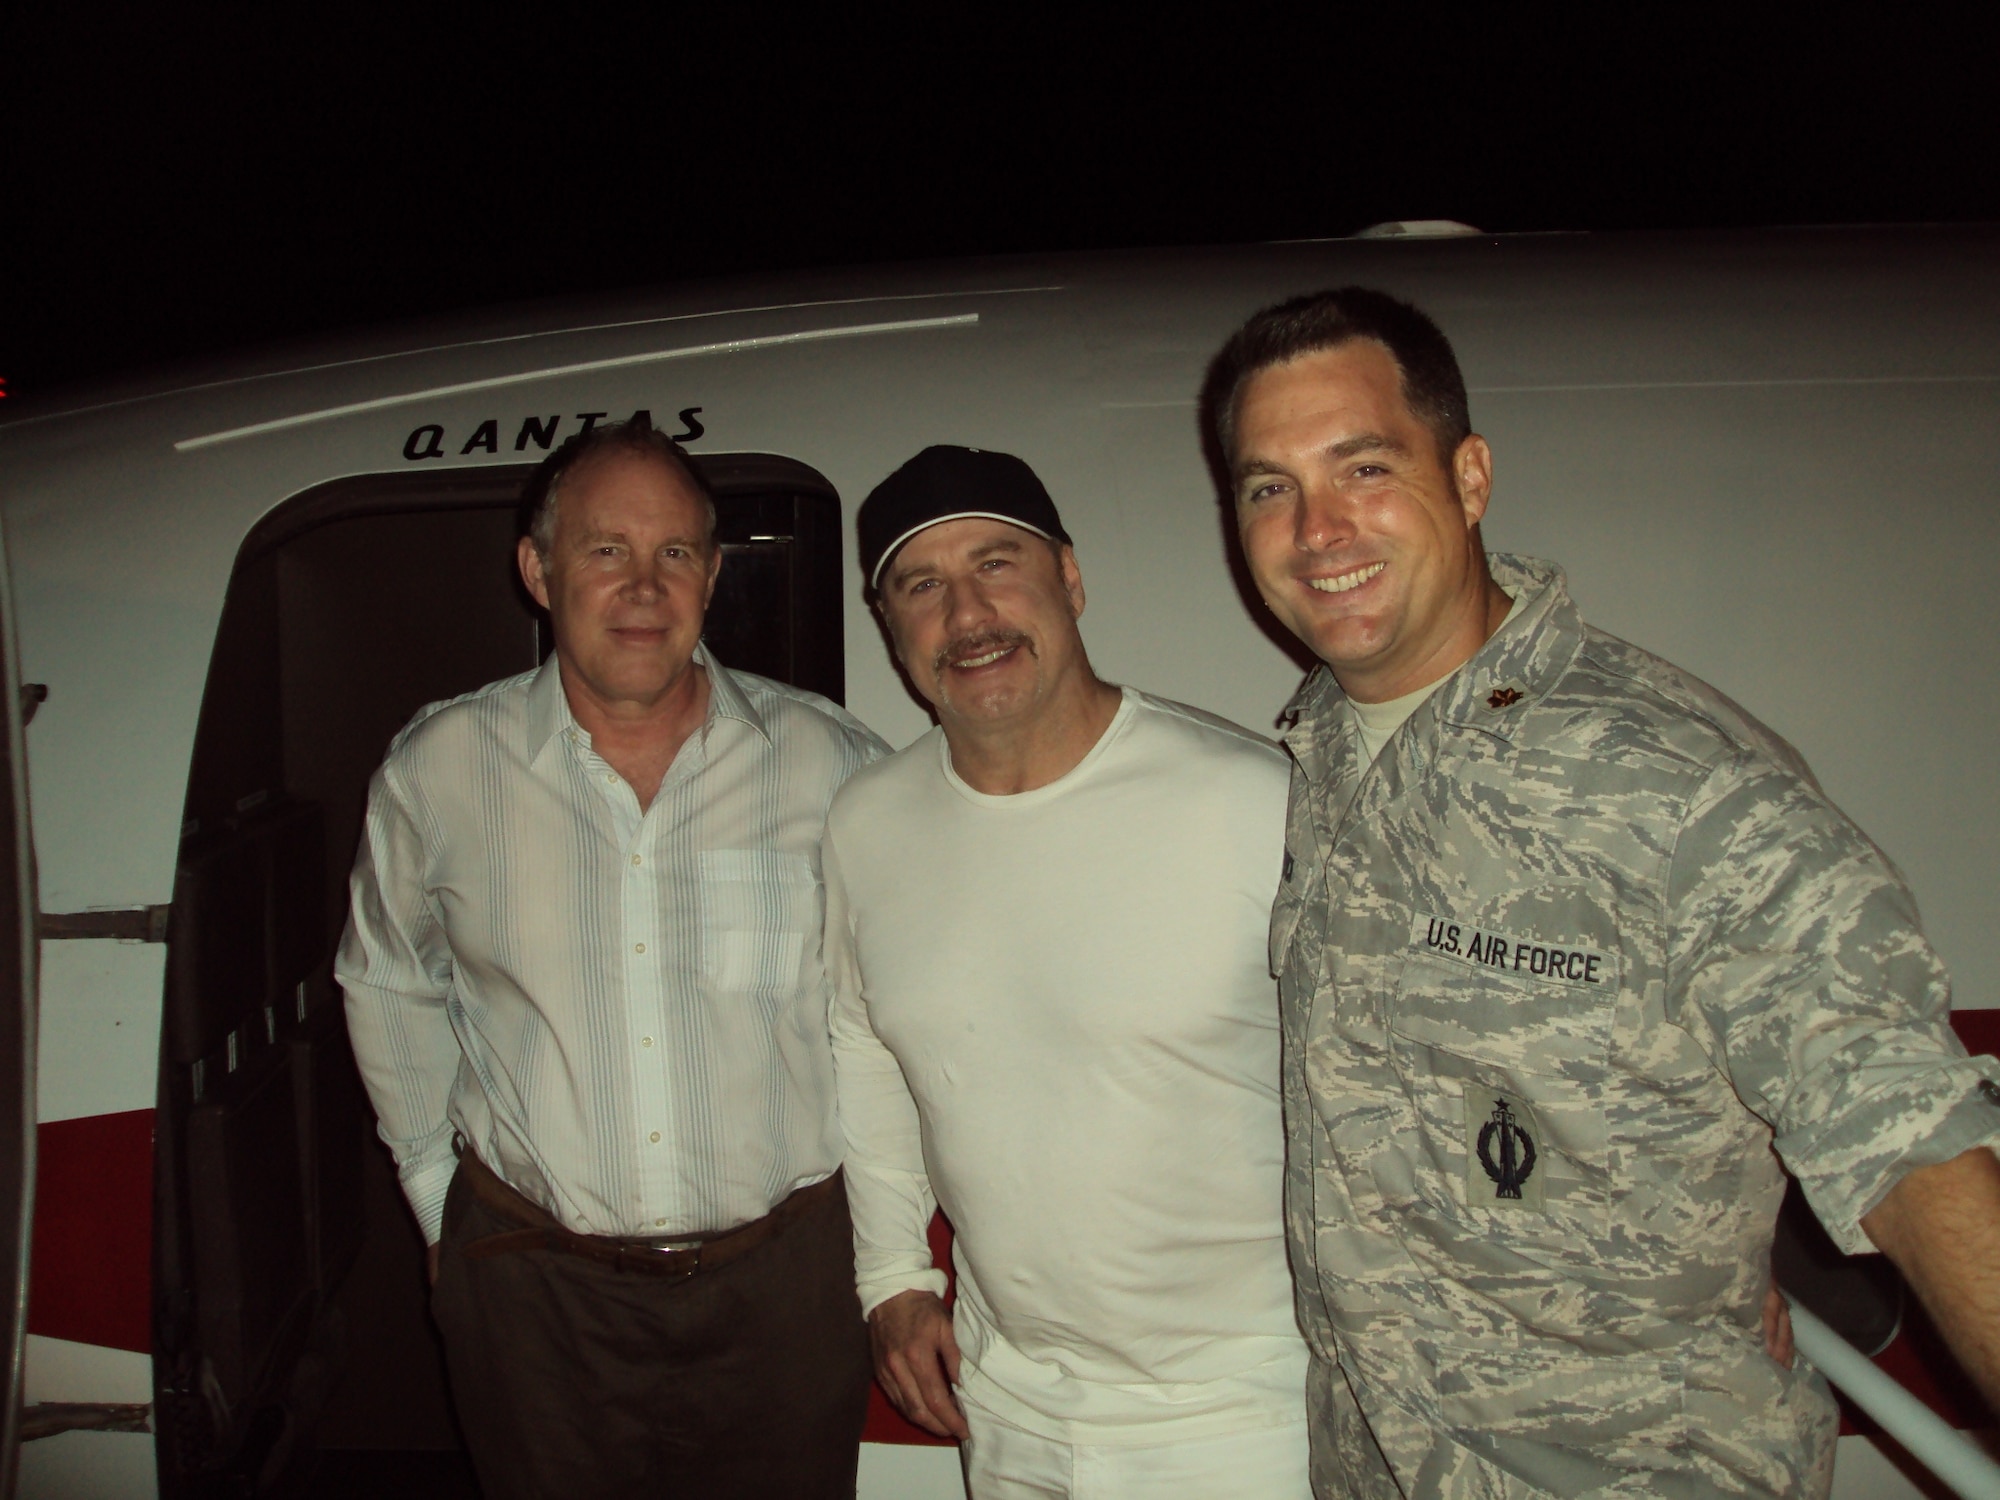 John Travolta (center) poses for a picture with Ascension Island Air Field Commander Maj. Jay Block (right) and Island Administrator Ross Denny during the actor's brief visit to Ascension May 21. Mr. Travolta landed on the island to refuel his plane following a vacation in Africa and was given a tour of the base and the rest of the island. “He thanked us for our service, asked a lot of questions about our mission and the island,” said Major Block of Mr. Travolta. “He was a really engaging and very friendly person.”
(U.S. Air Force photo courtesy Maj. Jay Block)